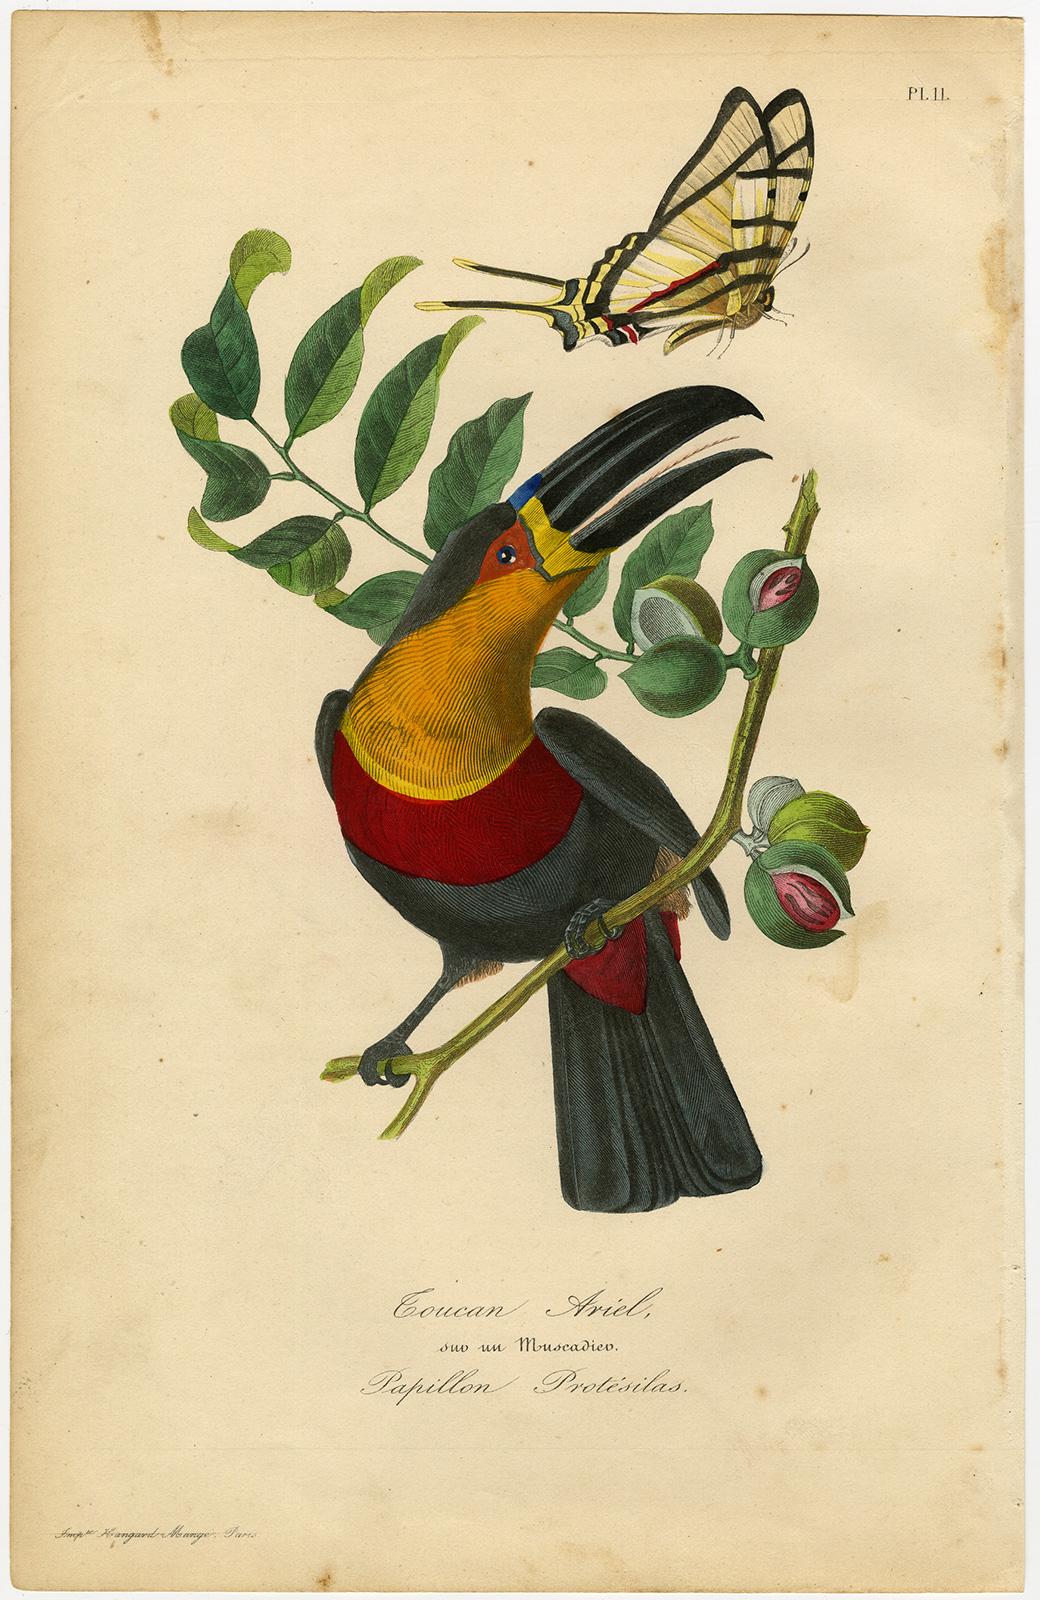 A toucan in a nutmeg tree with a butterfly by Le Maout - Engraving - 19th c. - Print by Jean-Emmanuel-Marie Le Maout